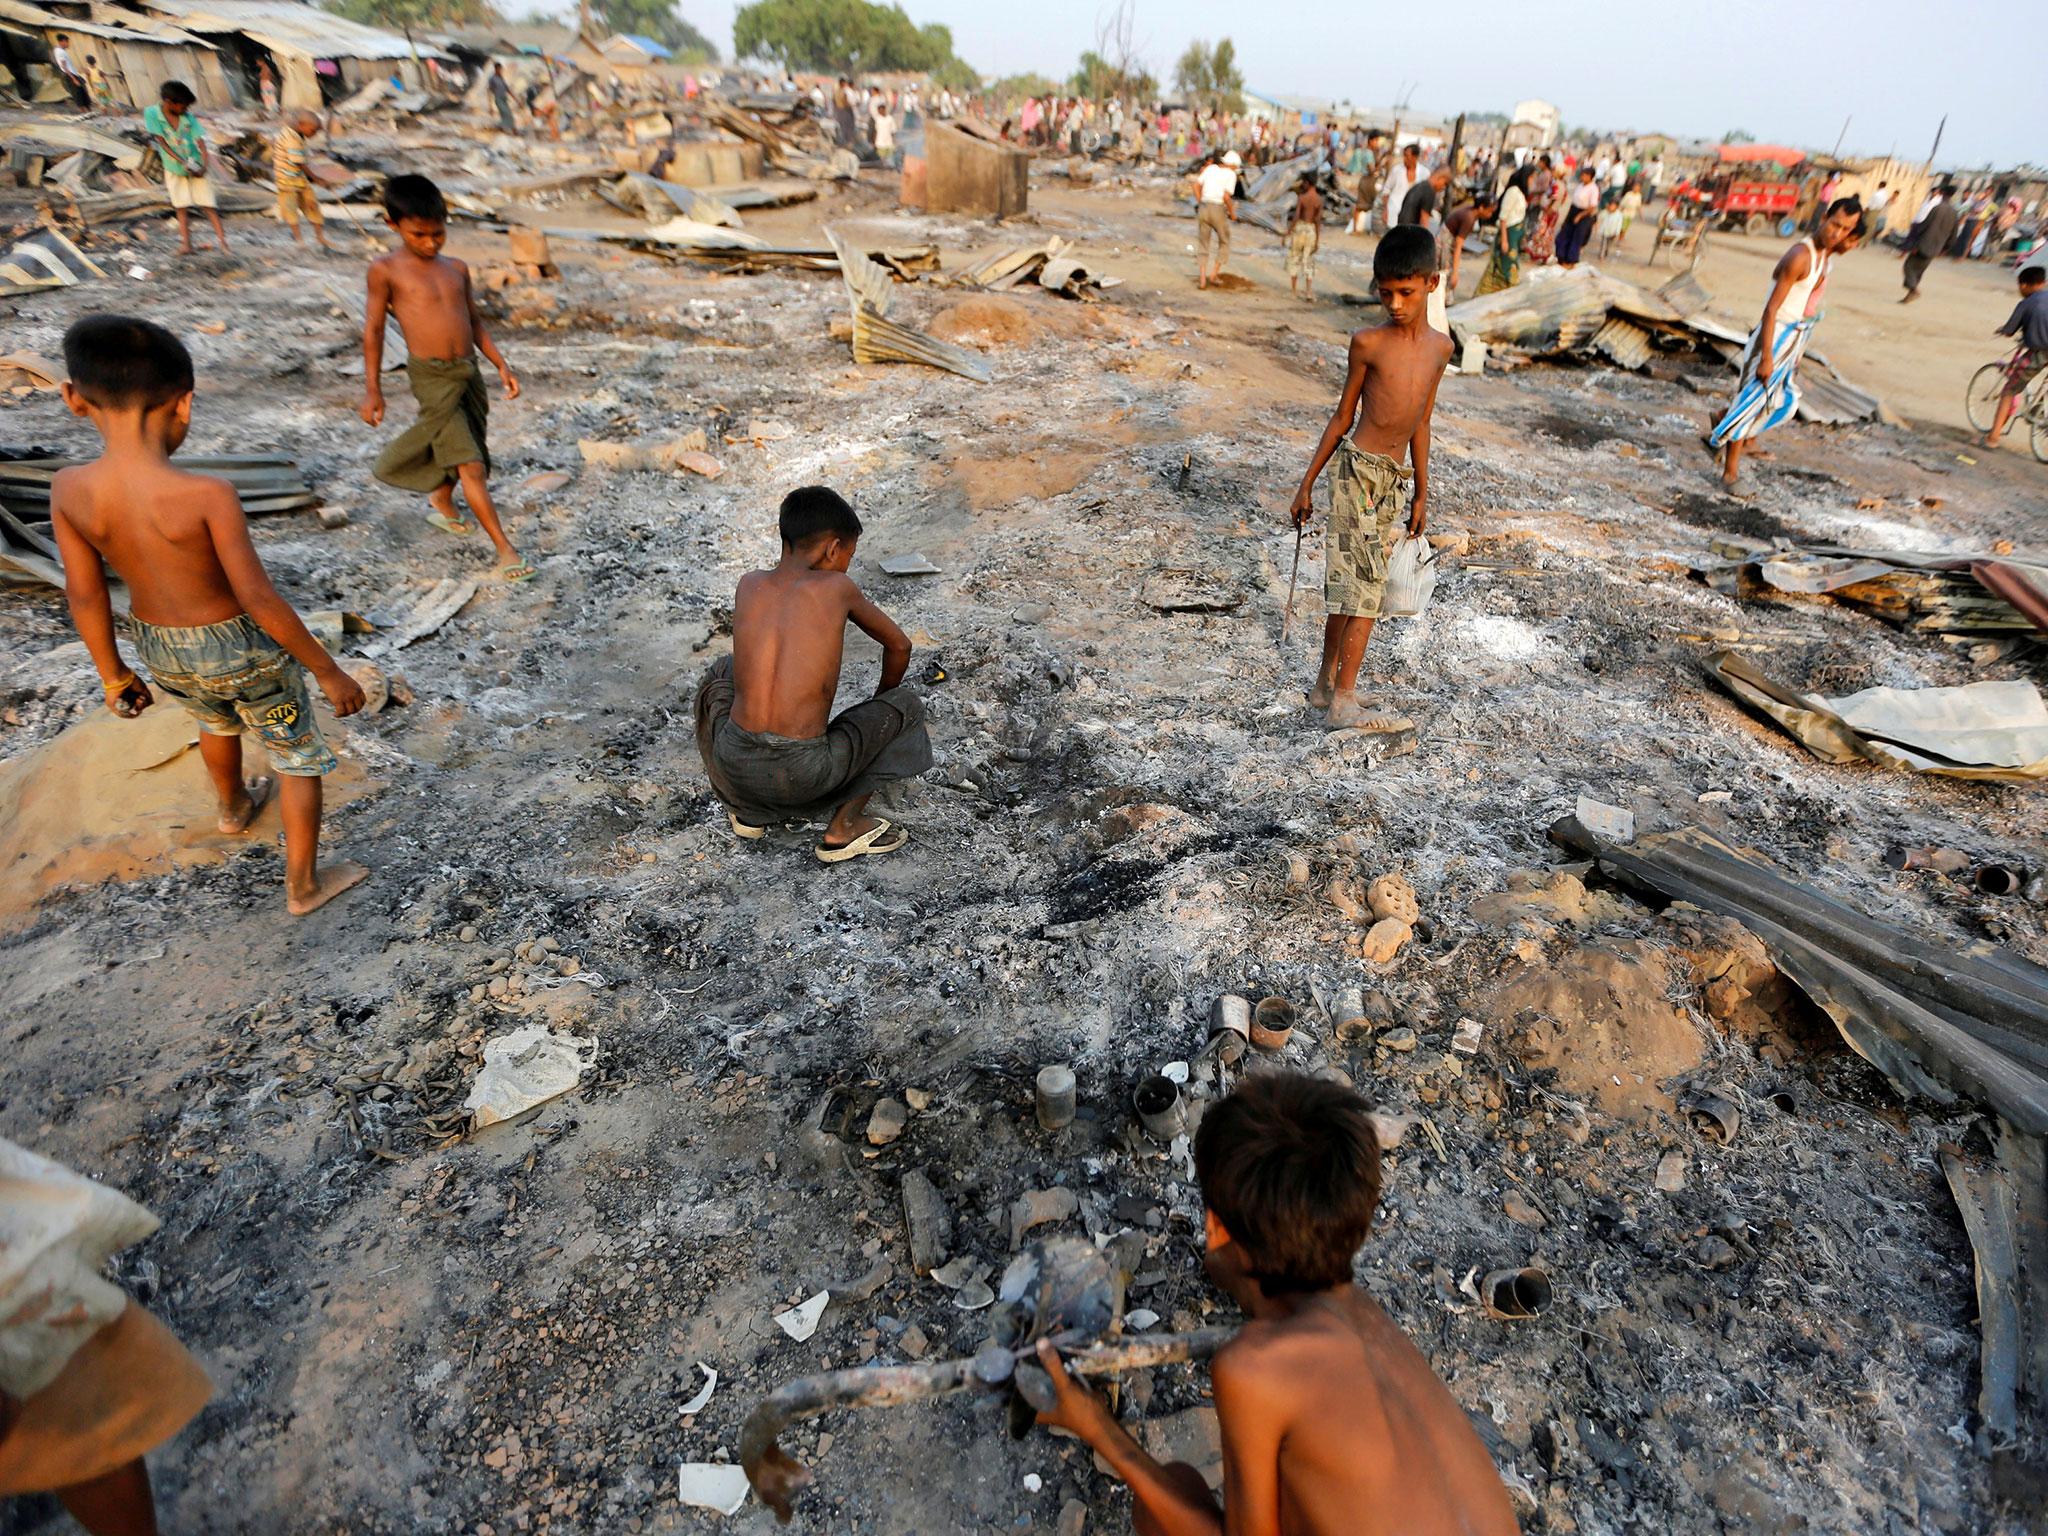 Boys search for useful items among the ashes of burnt houses after fire destroyed shelters at a camp for internally displaced Rohingya Muslims